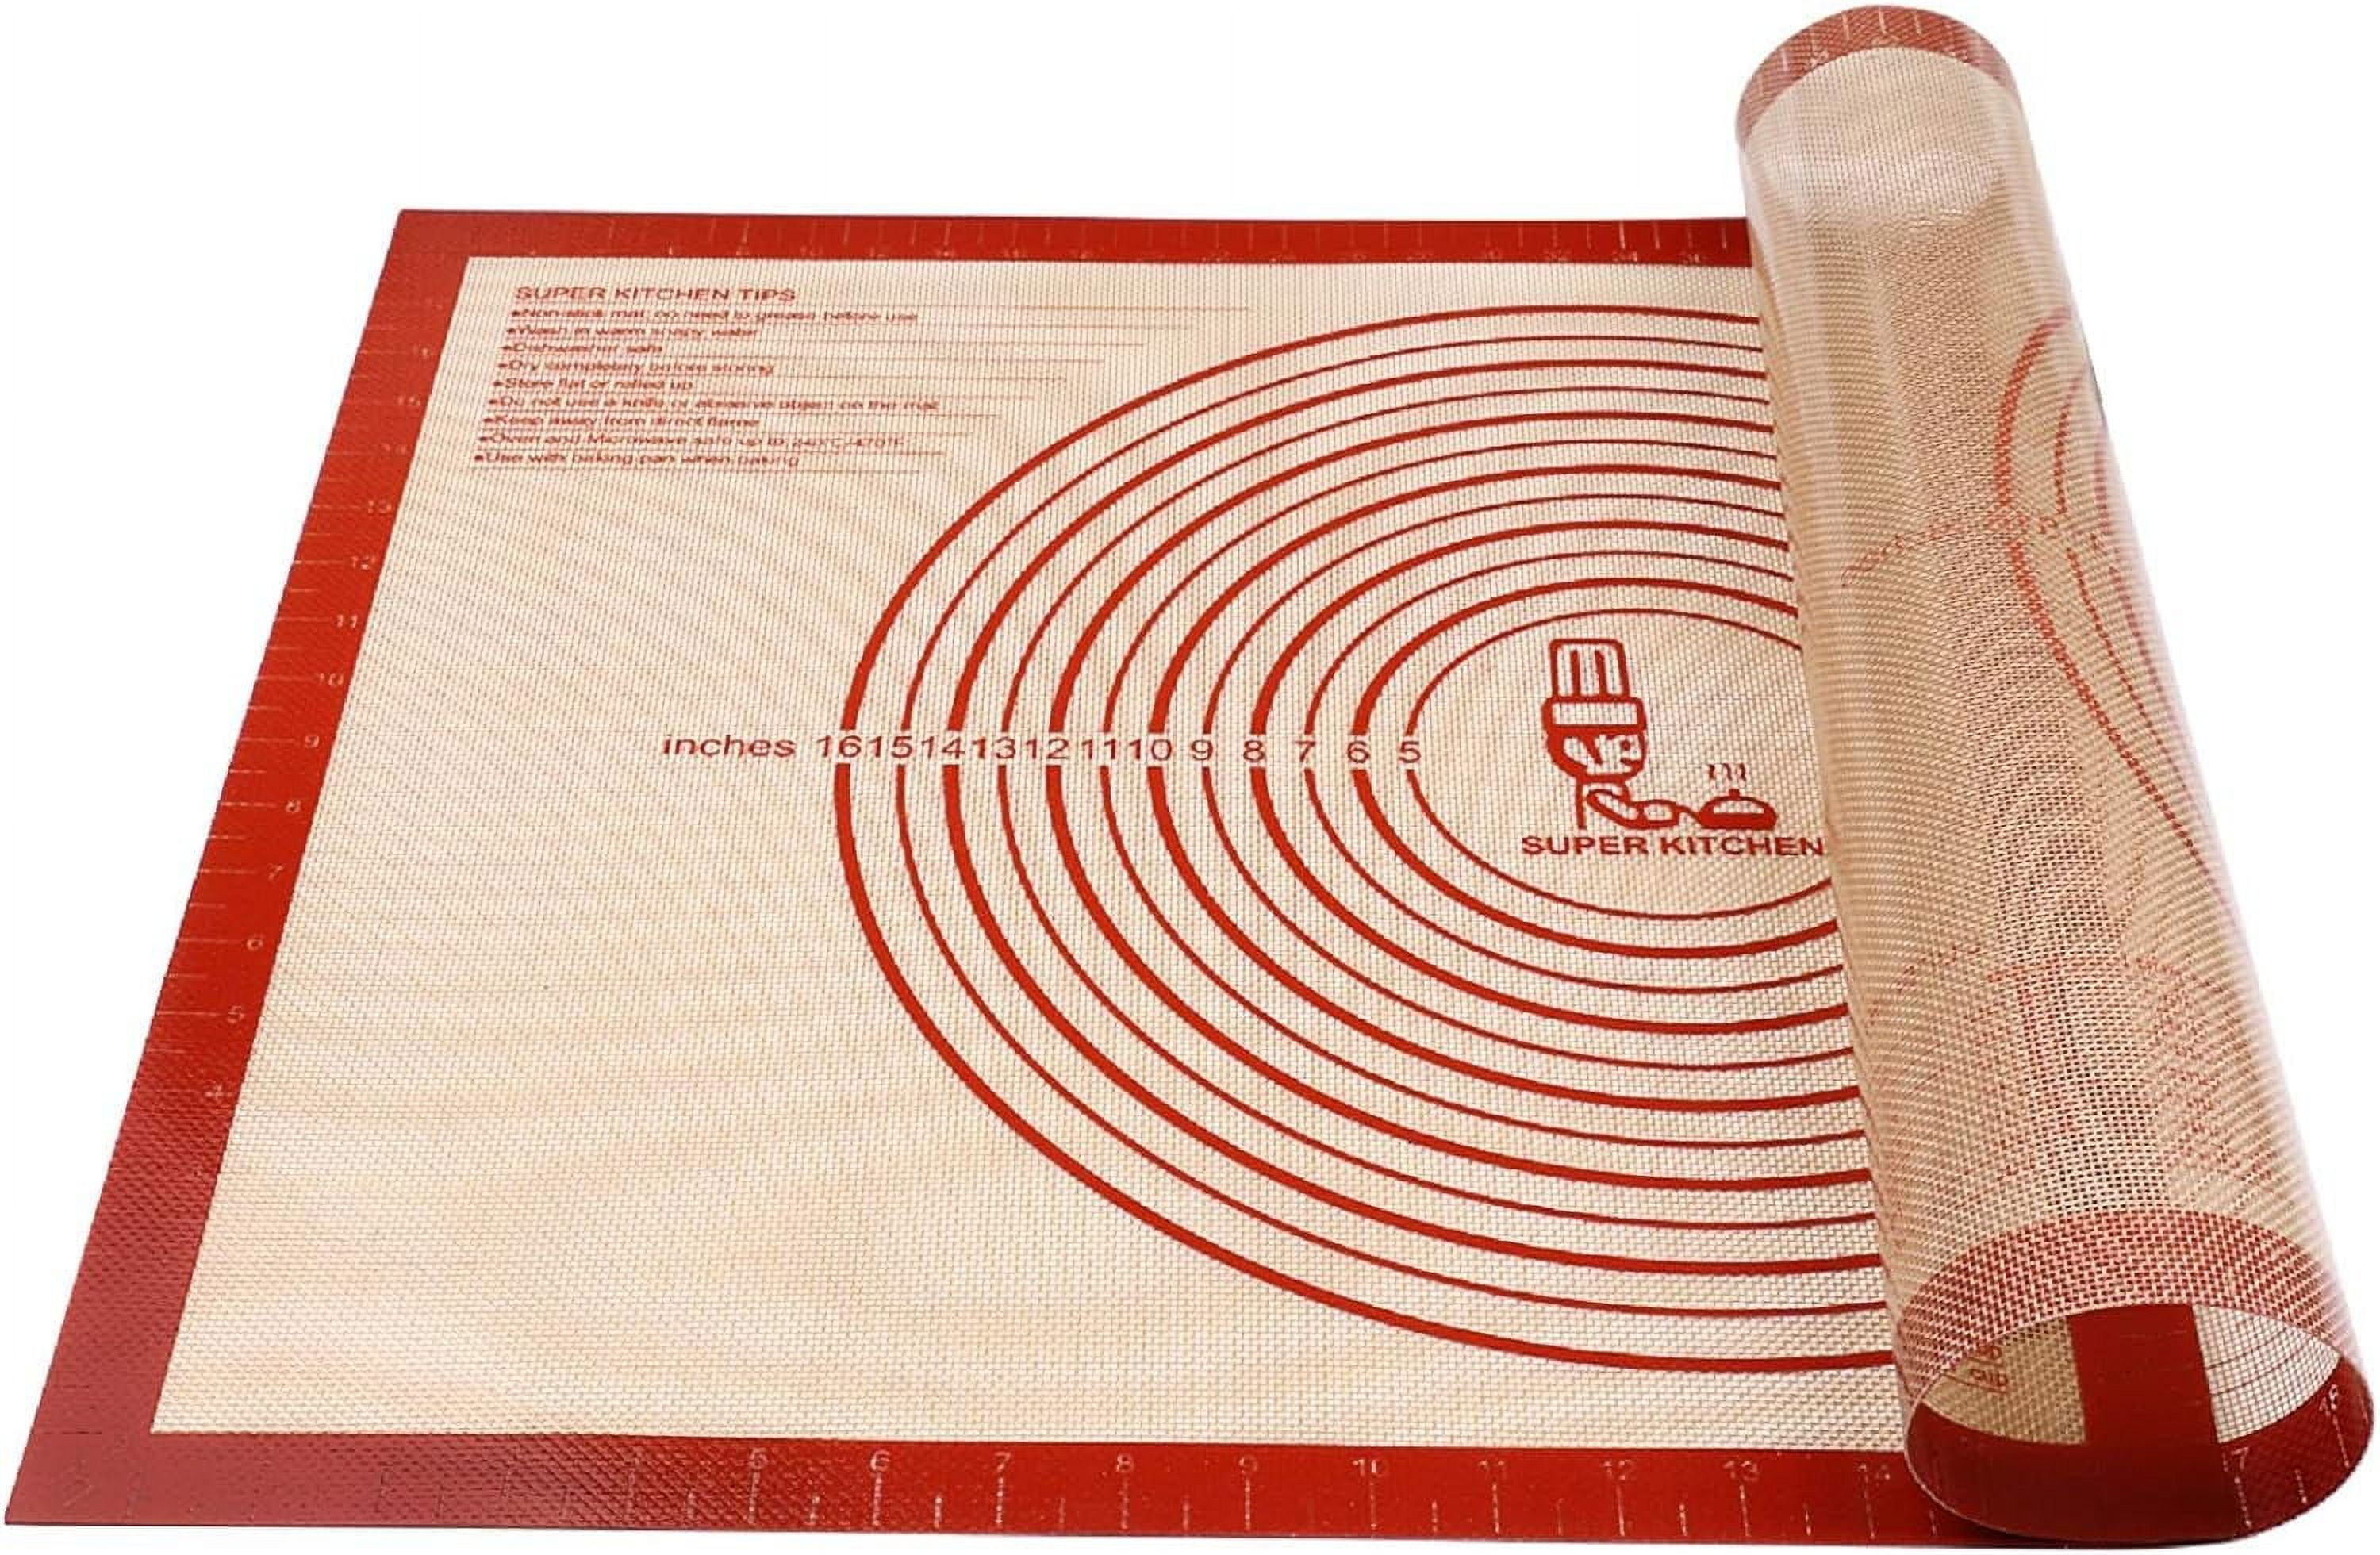 Hot Sale Silicone Pastry Baking Mat with Measurement